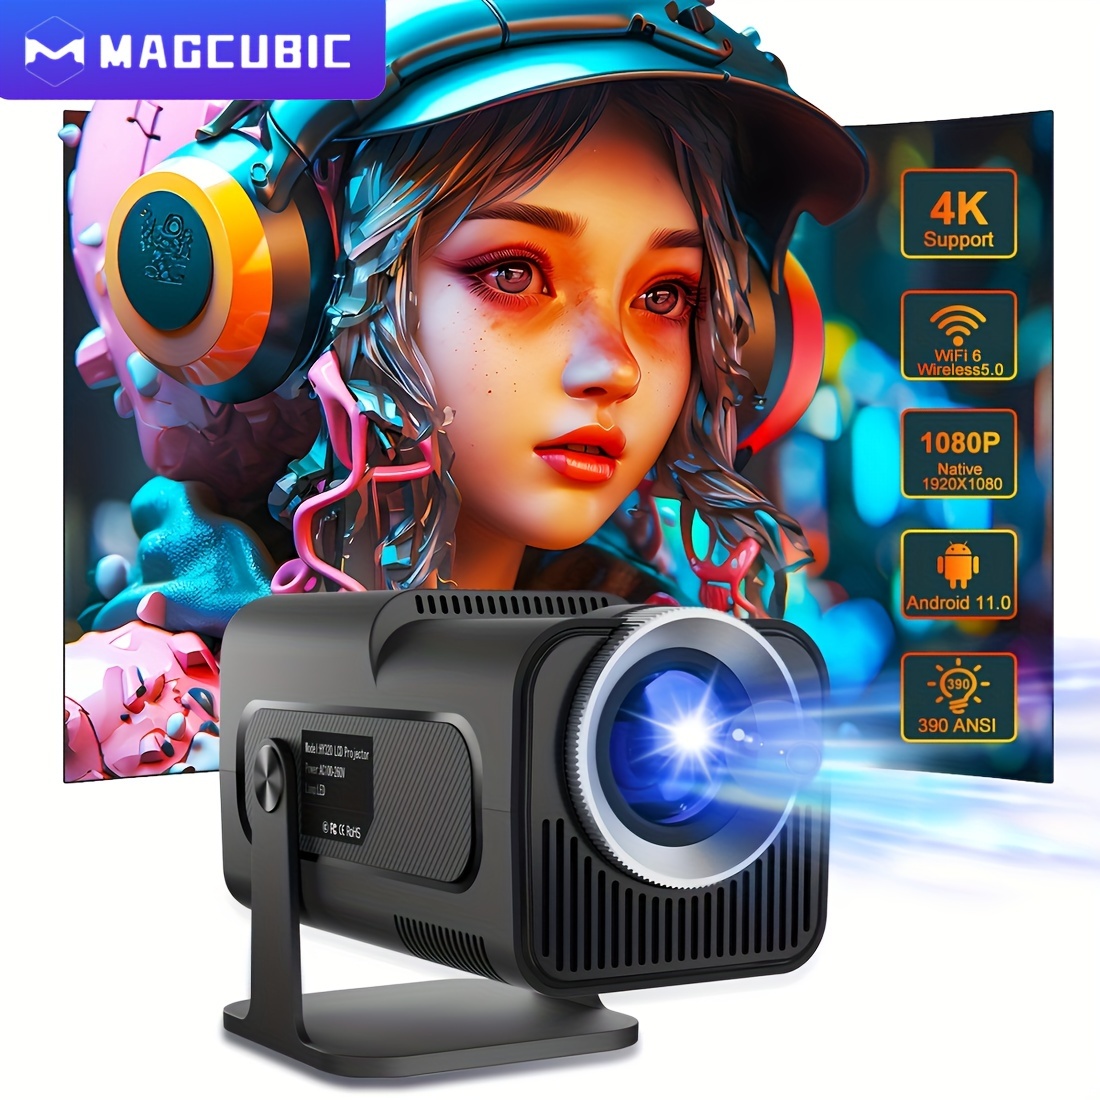 

Magcubic 4k Native 1080p Android 11 Projector Us Plug 390ansi Hy320 Dual Wifi6 Bt5.0 Cinema Outdoor Portable Projetor Upgrated Hy300